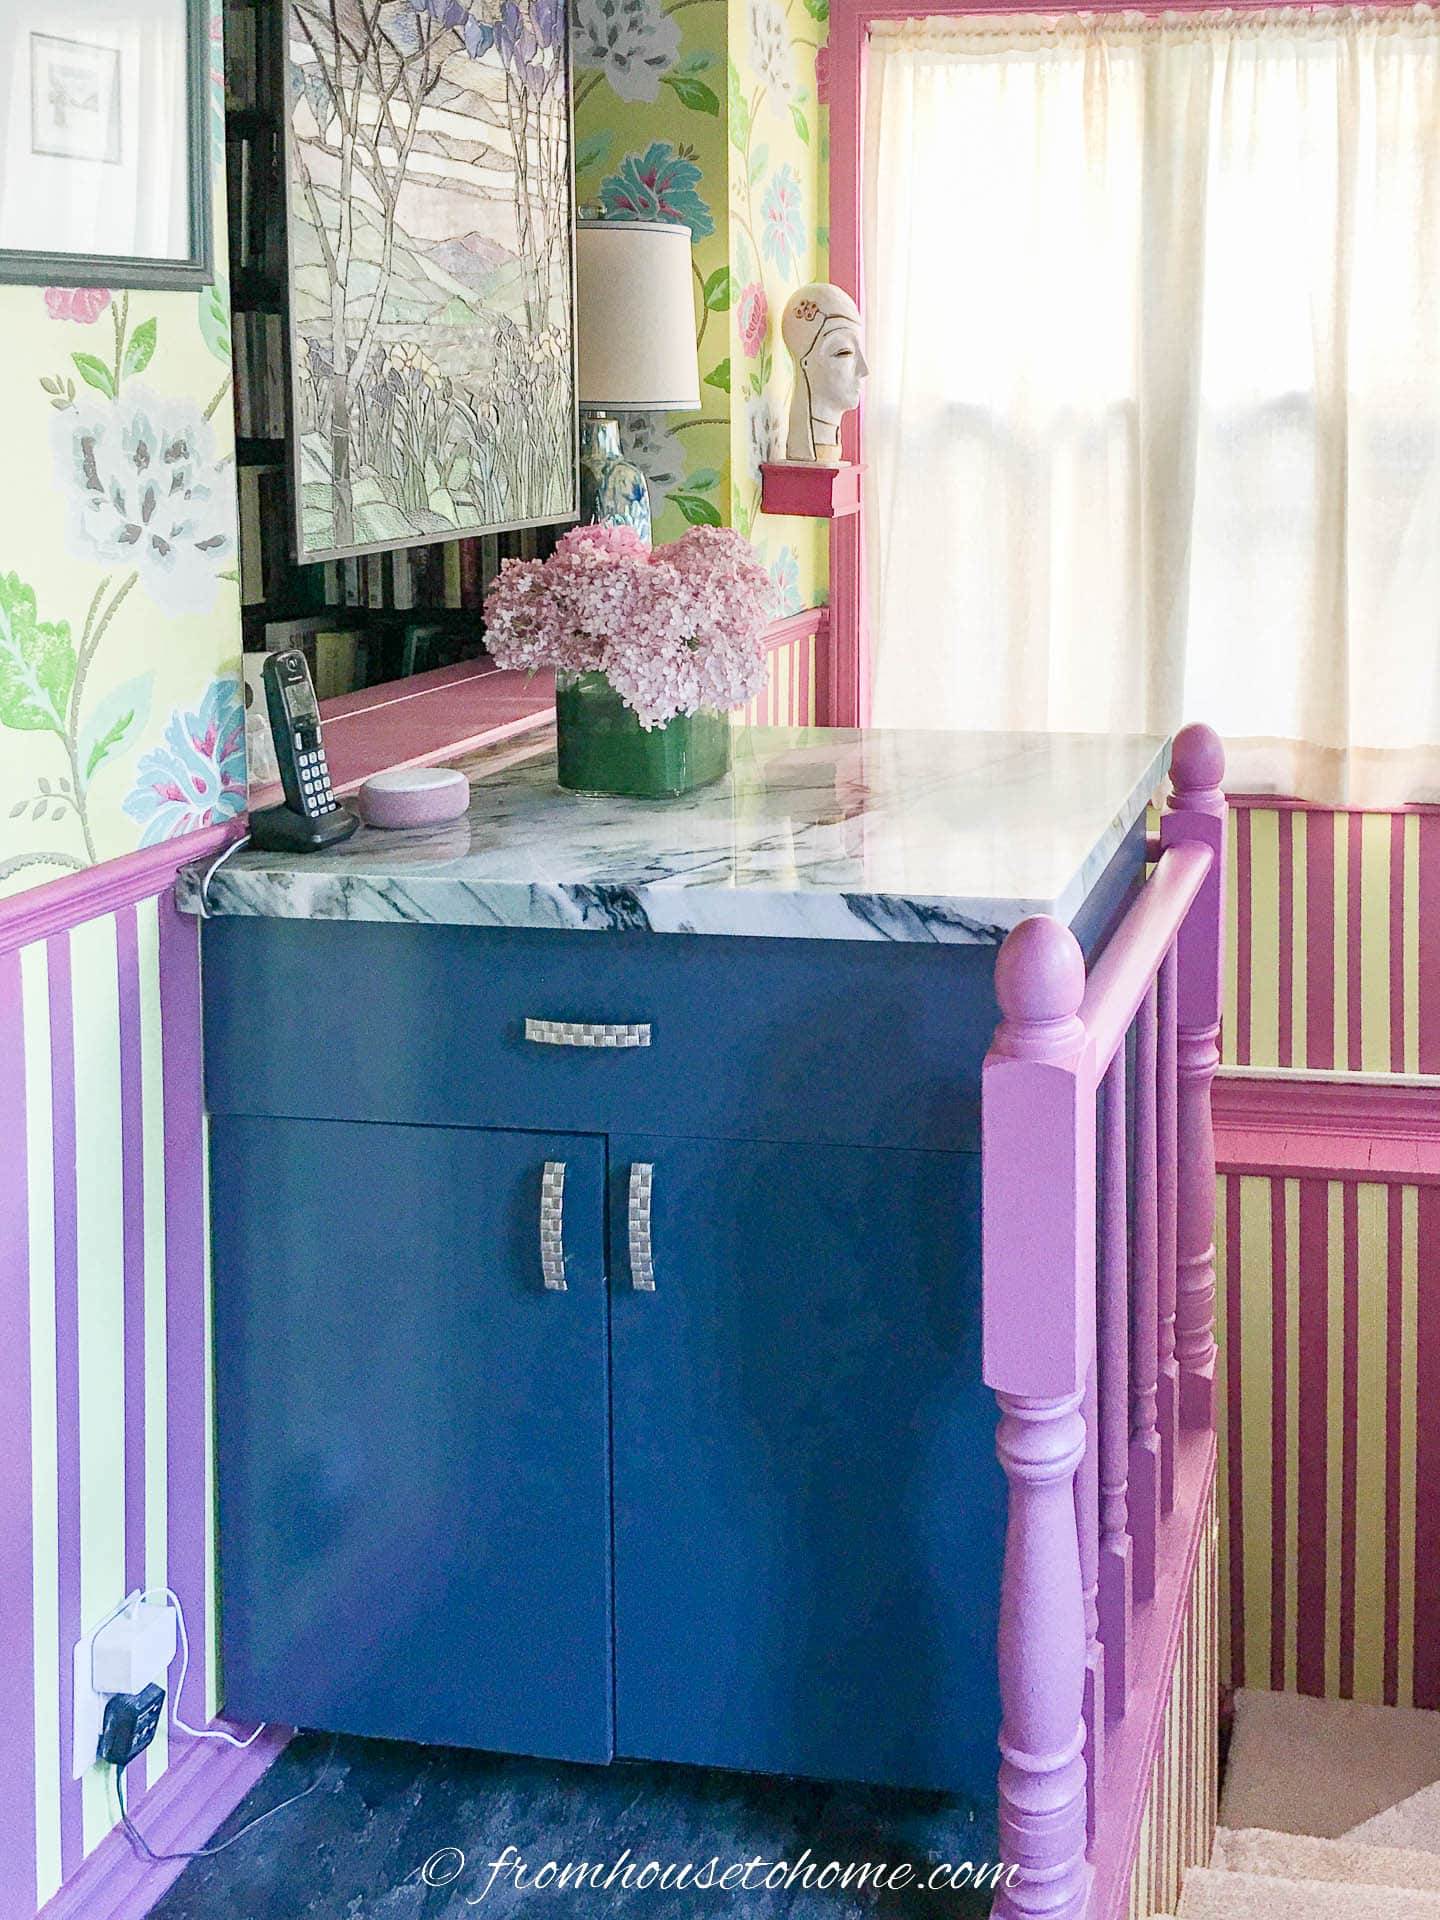 Teal base cabinet installed beside a stairwell with pink woodwork, and painted yellow and pink vertical stripes on the walls